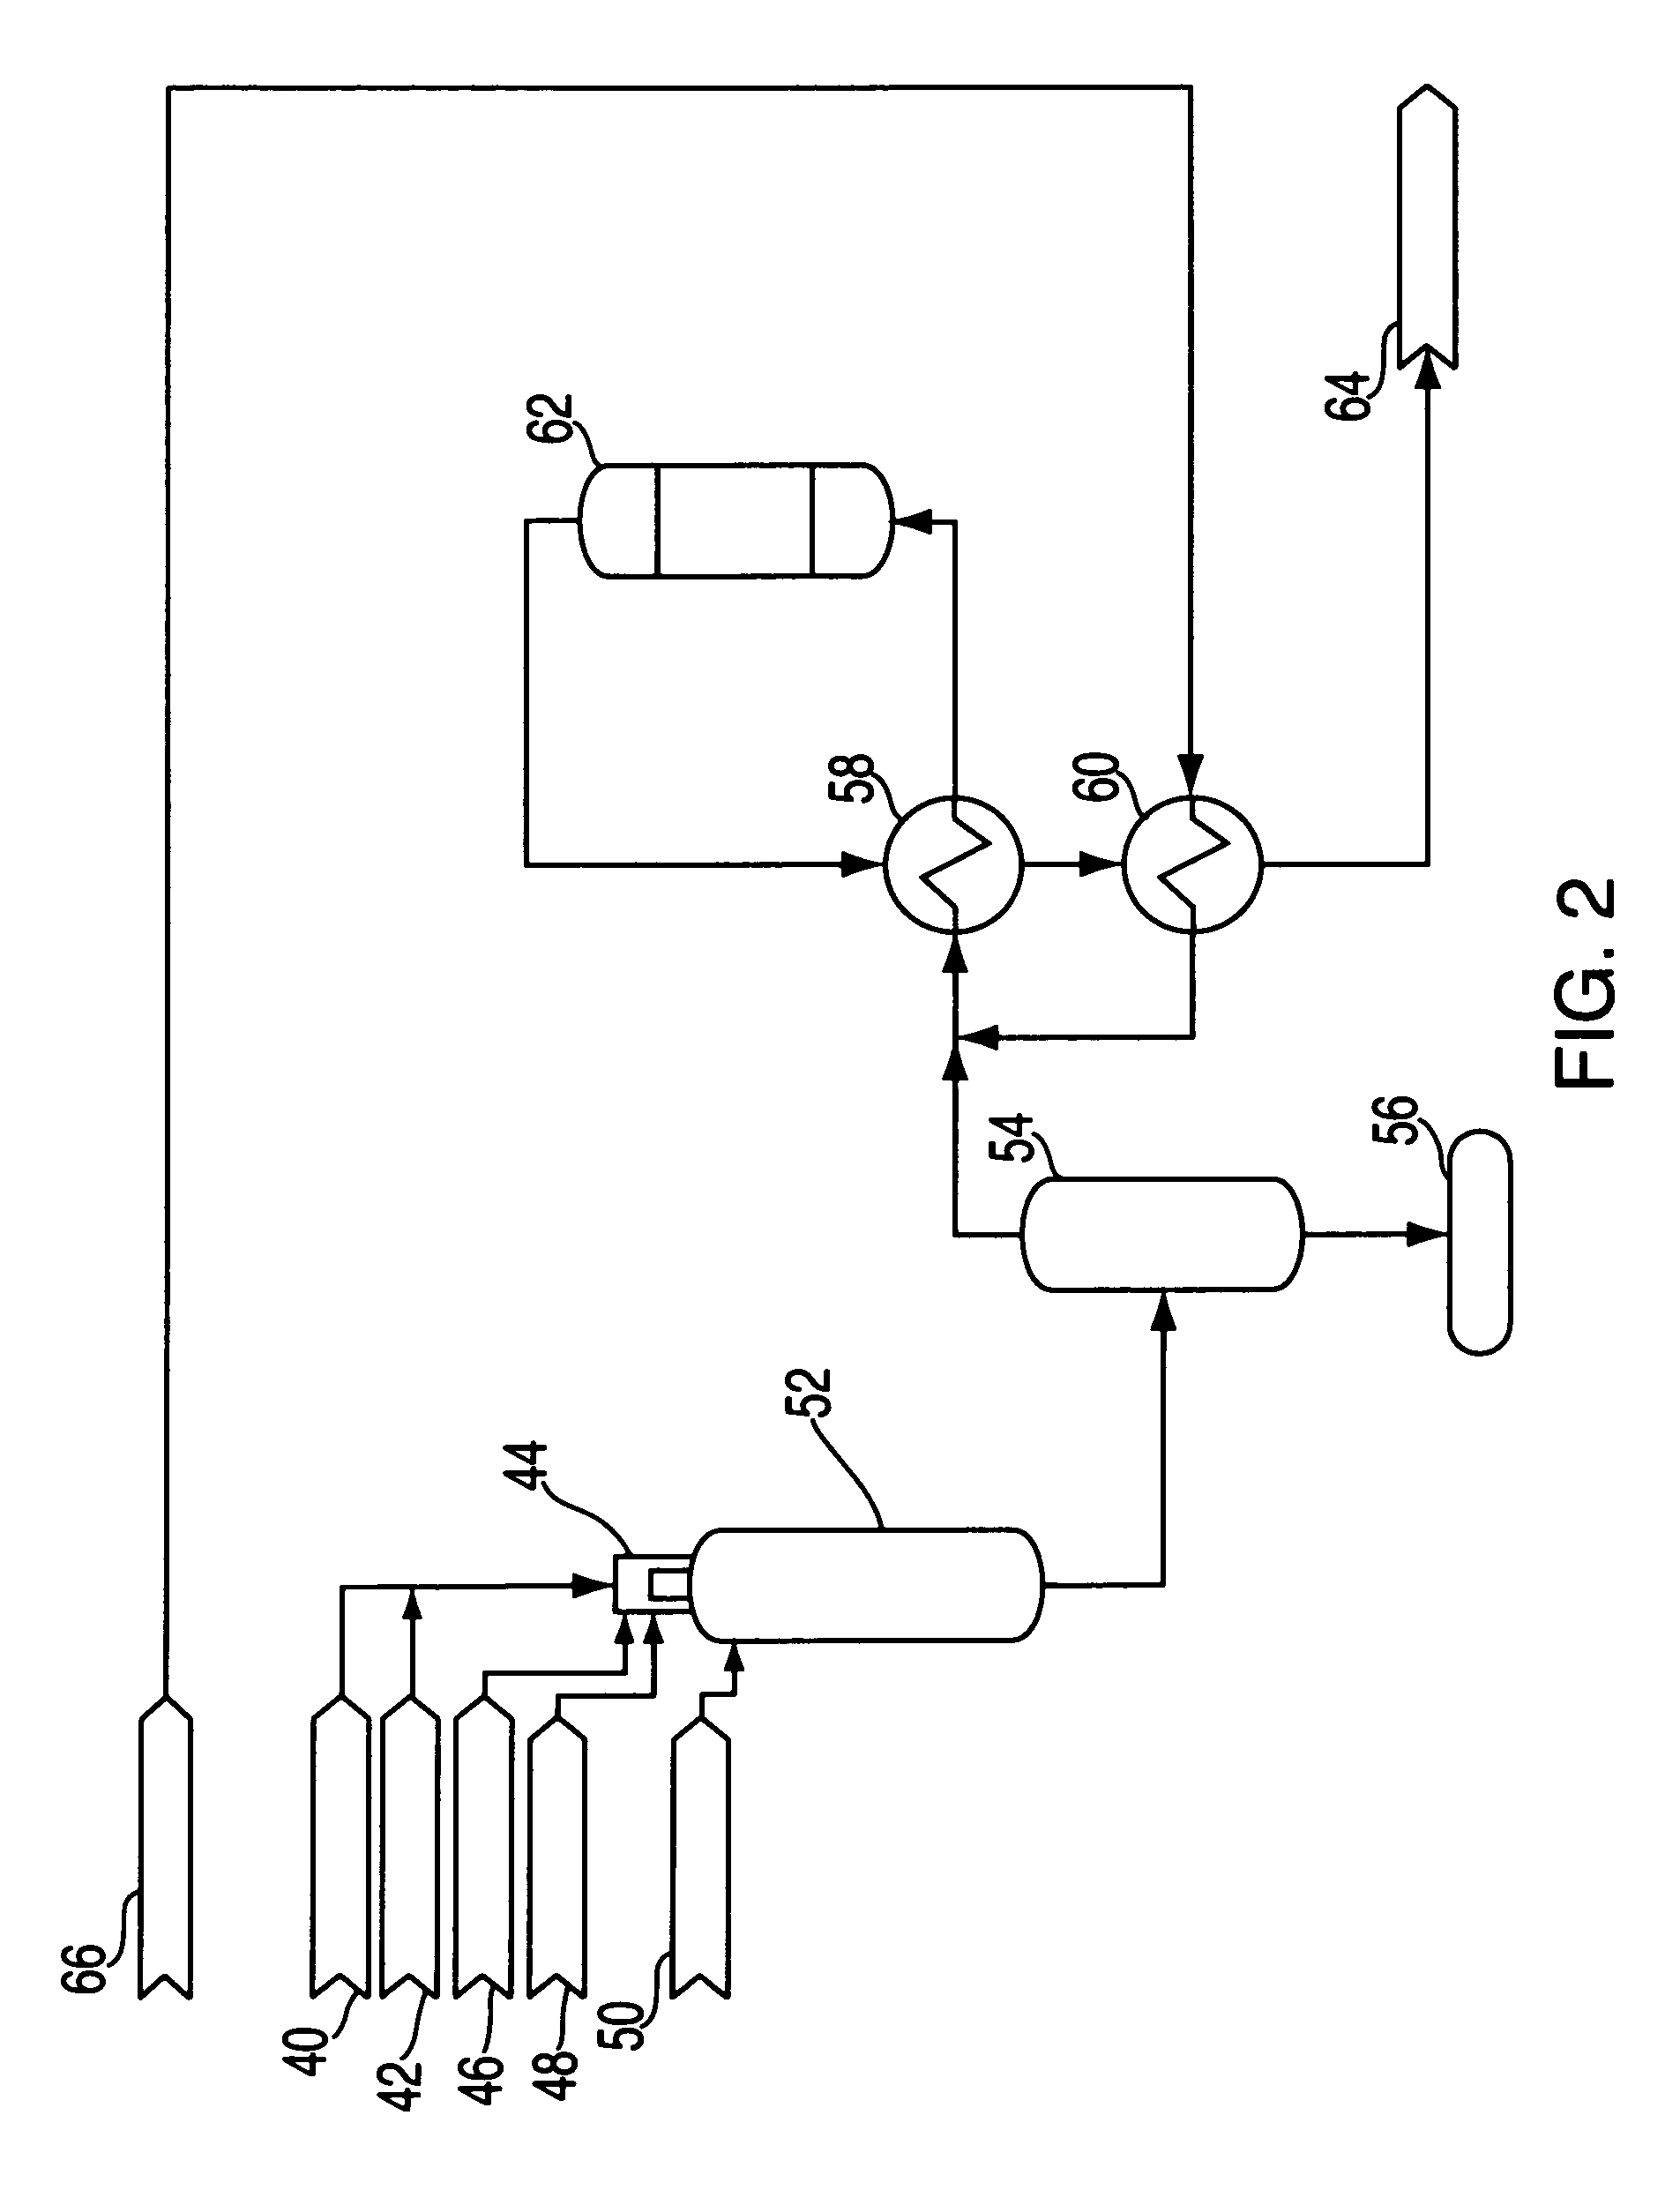 Method producing metal nanopowders by decompositon of metal carbonyl using an induction plasma torch